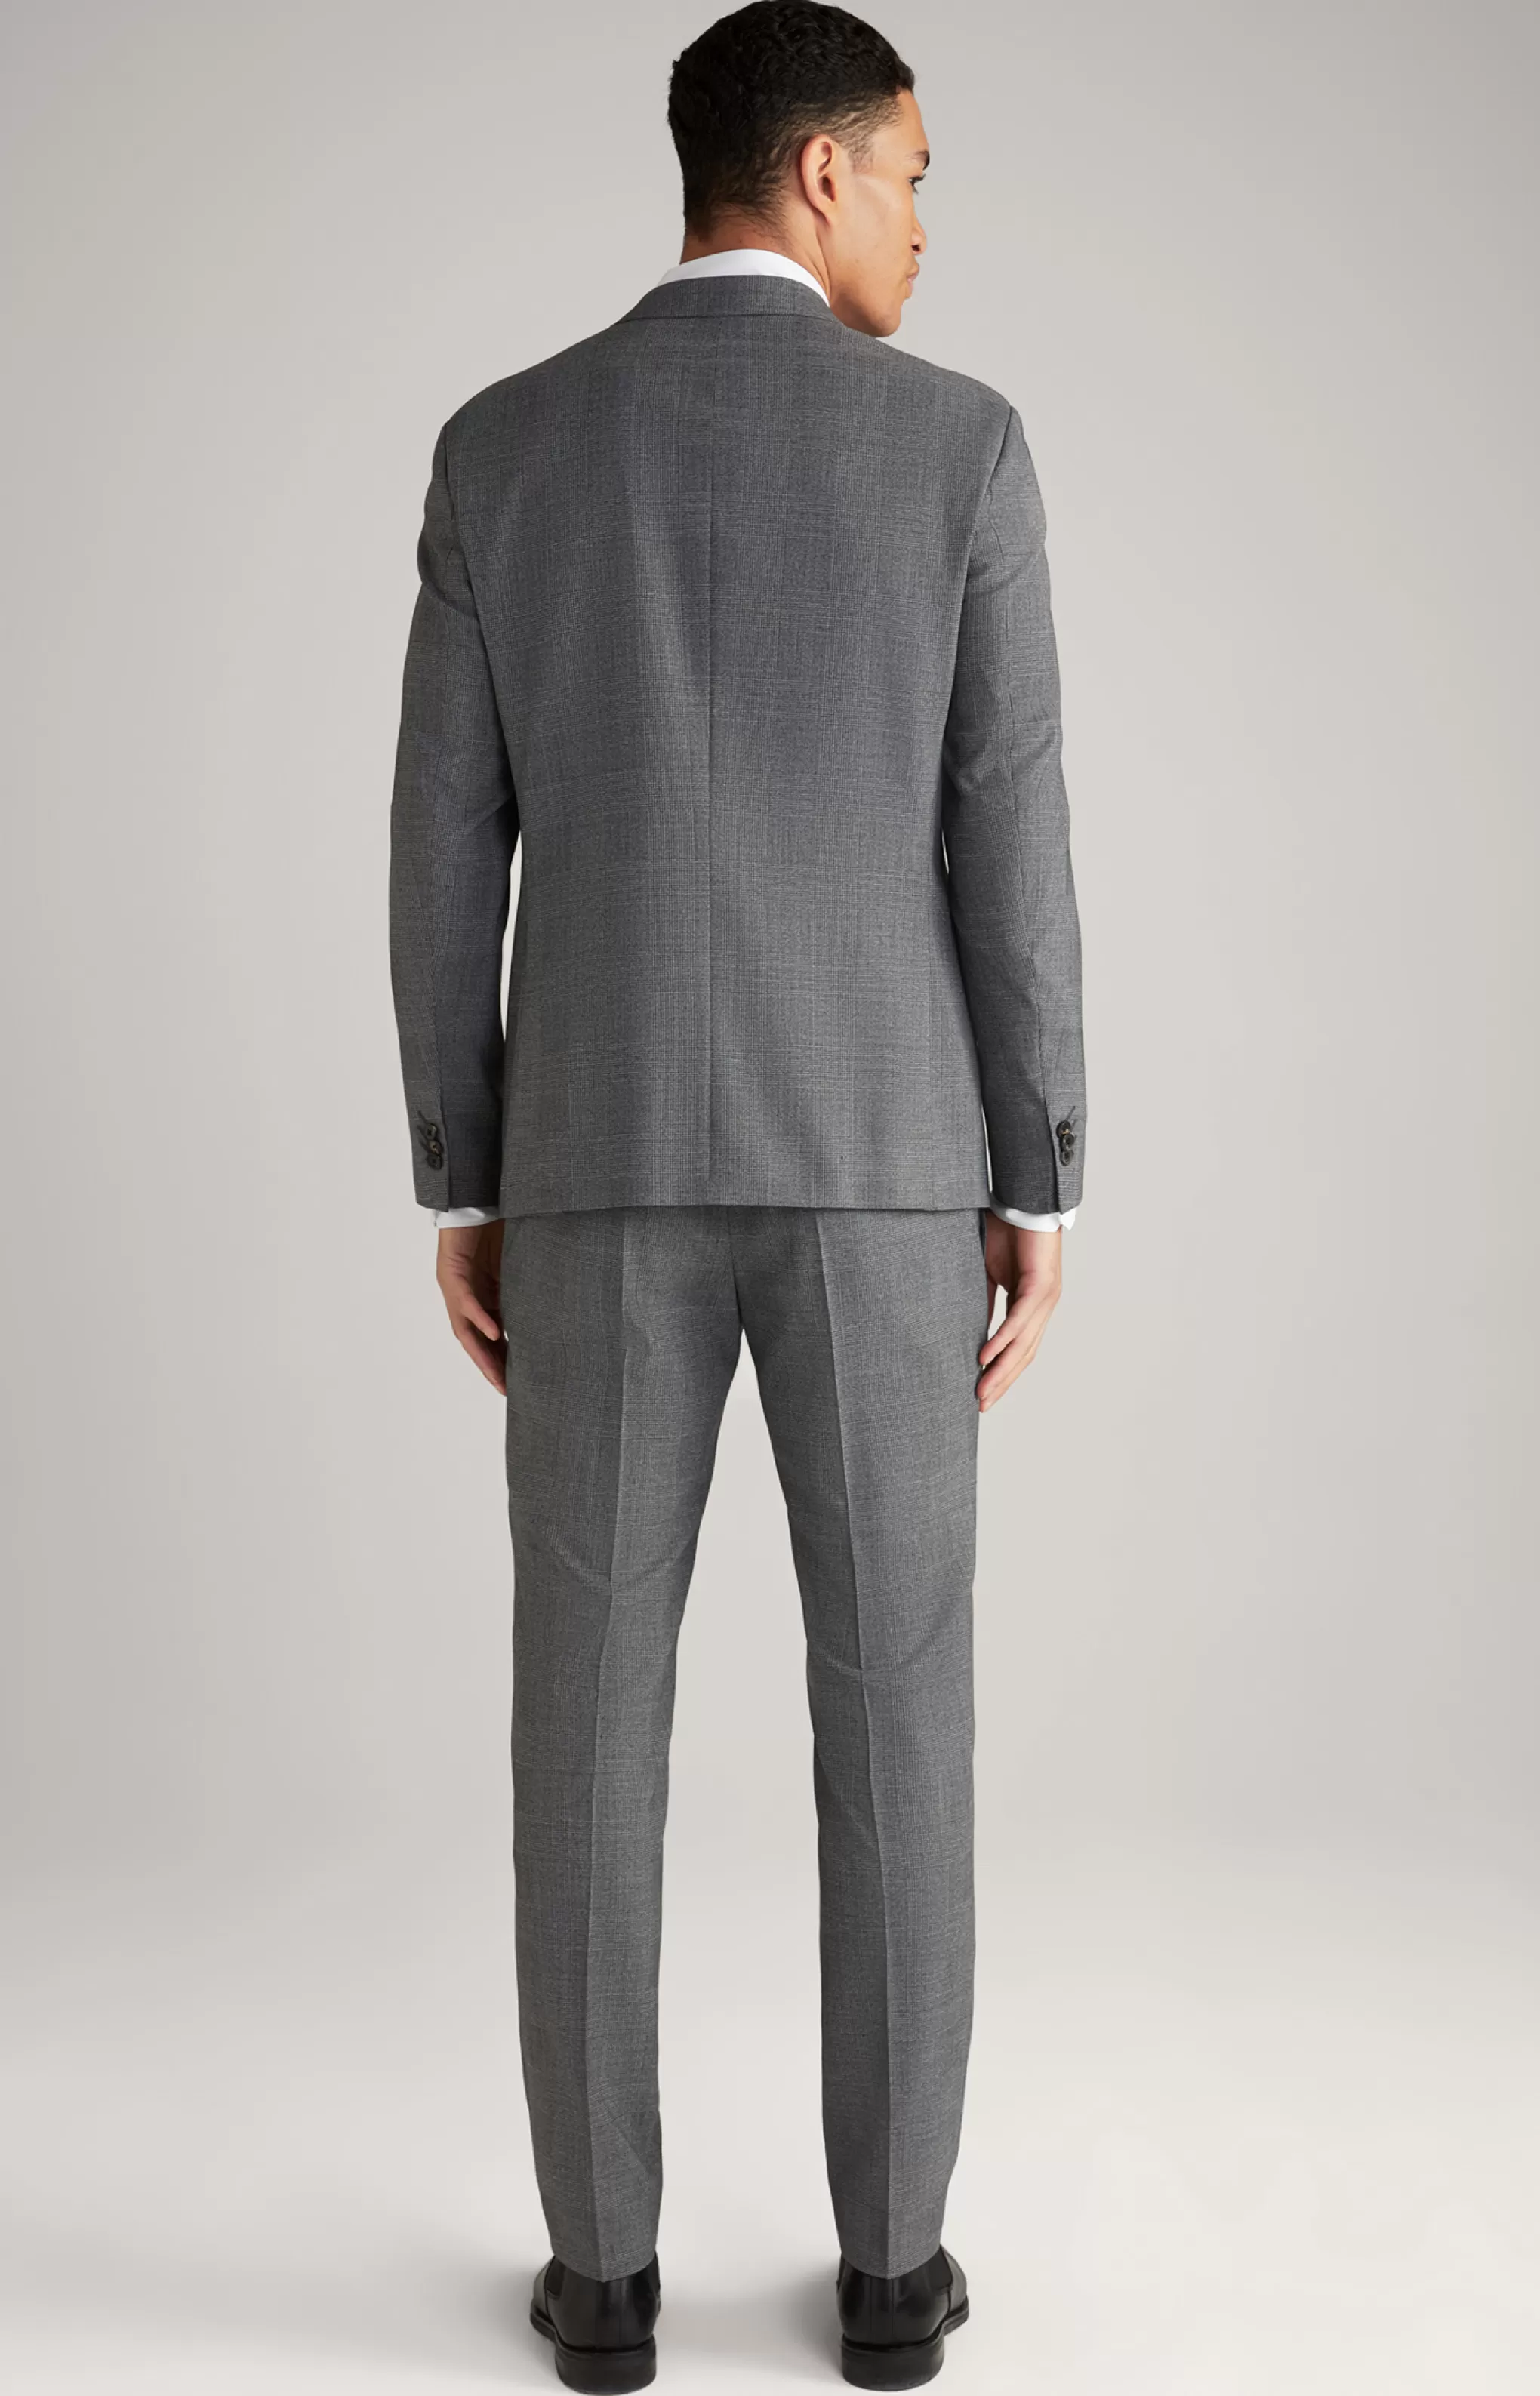 Suits | Clothing*JOOP Suits | Clothing Damon Gun Suit in Grey Check